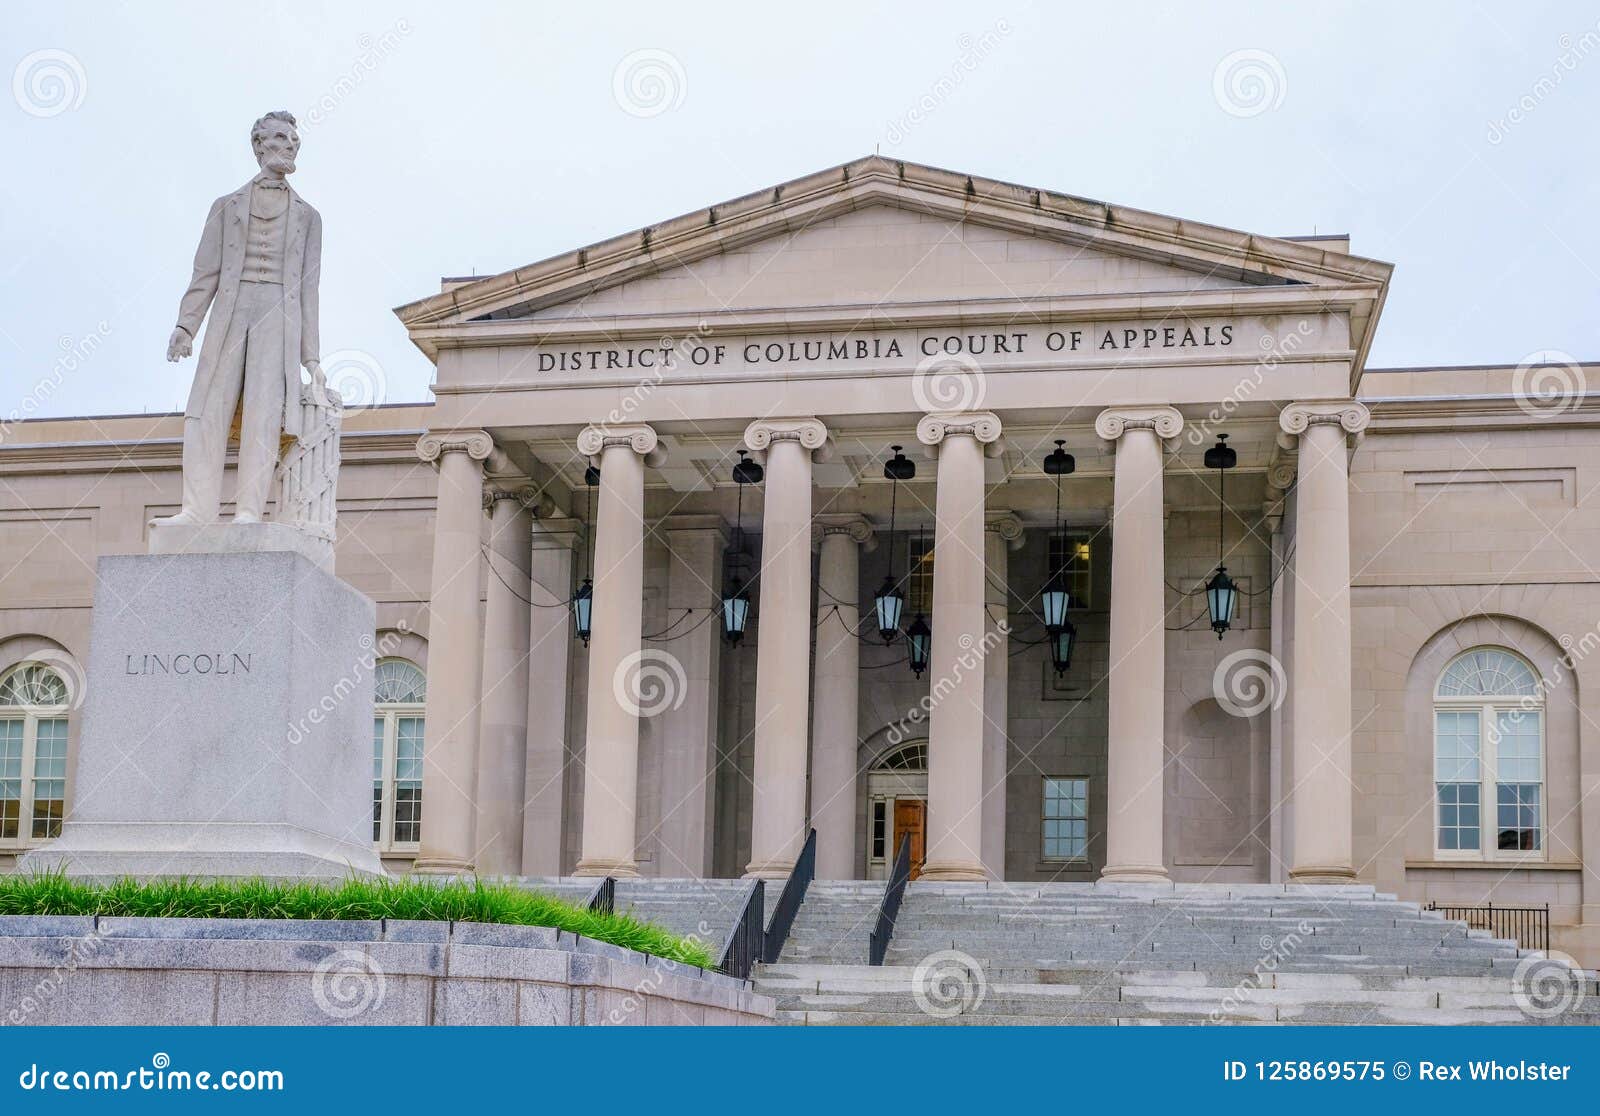 court of appeals for the district of columbia